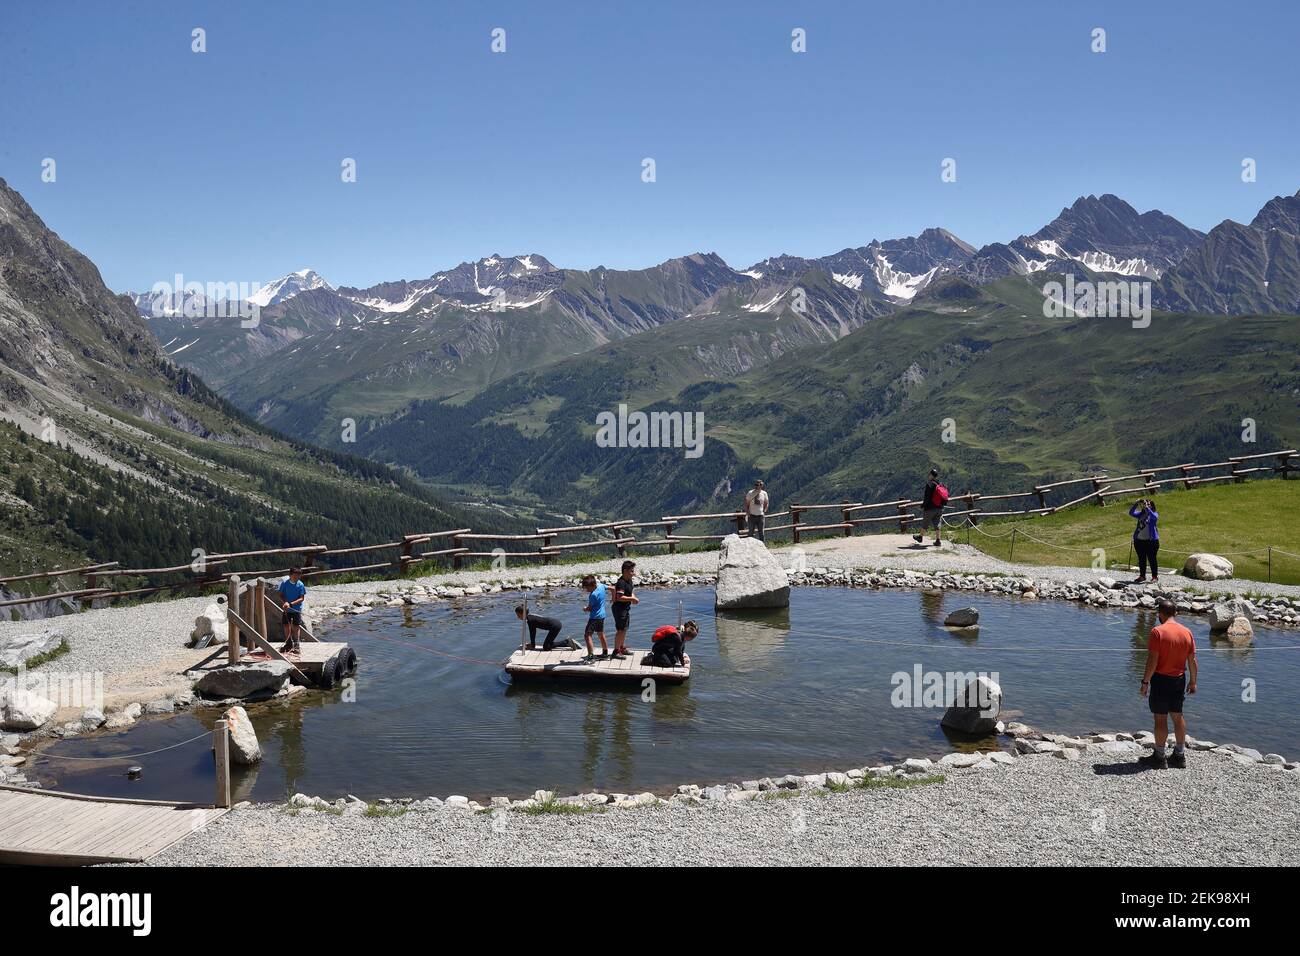 Some tourists around a pond in the intermediate of the Skyway Monte Bianco cable car in the Alps which connects the Italian city of Courmayeur with Punta Helbronner the southern